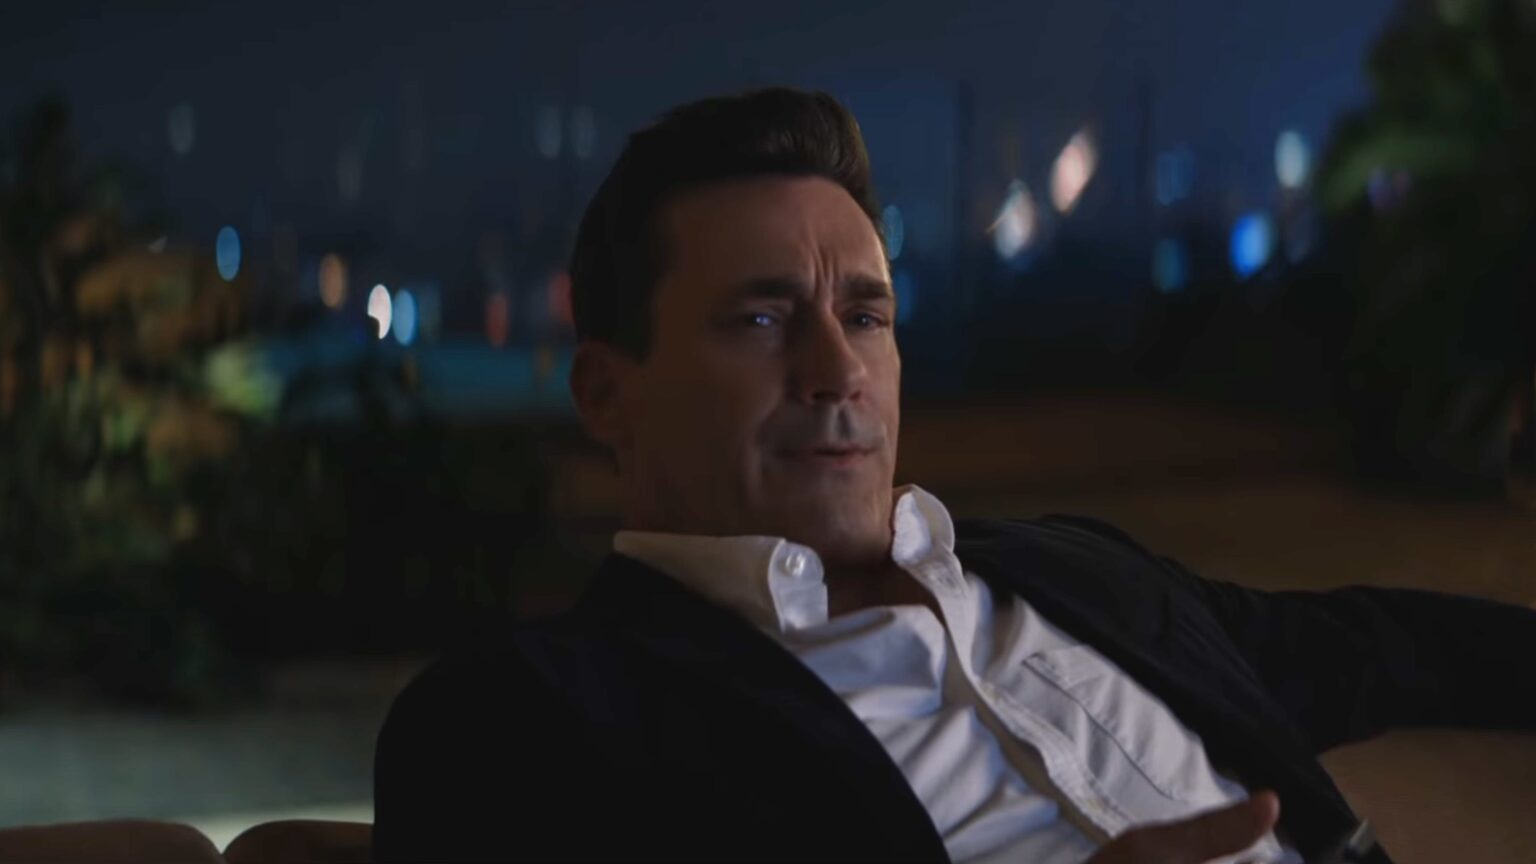 Jon Hamm complains in a new ad that Apple TV+ has everyone but him.